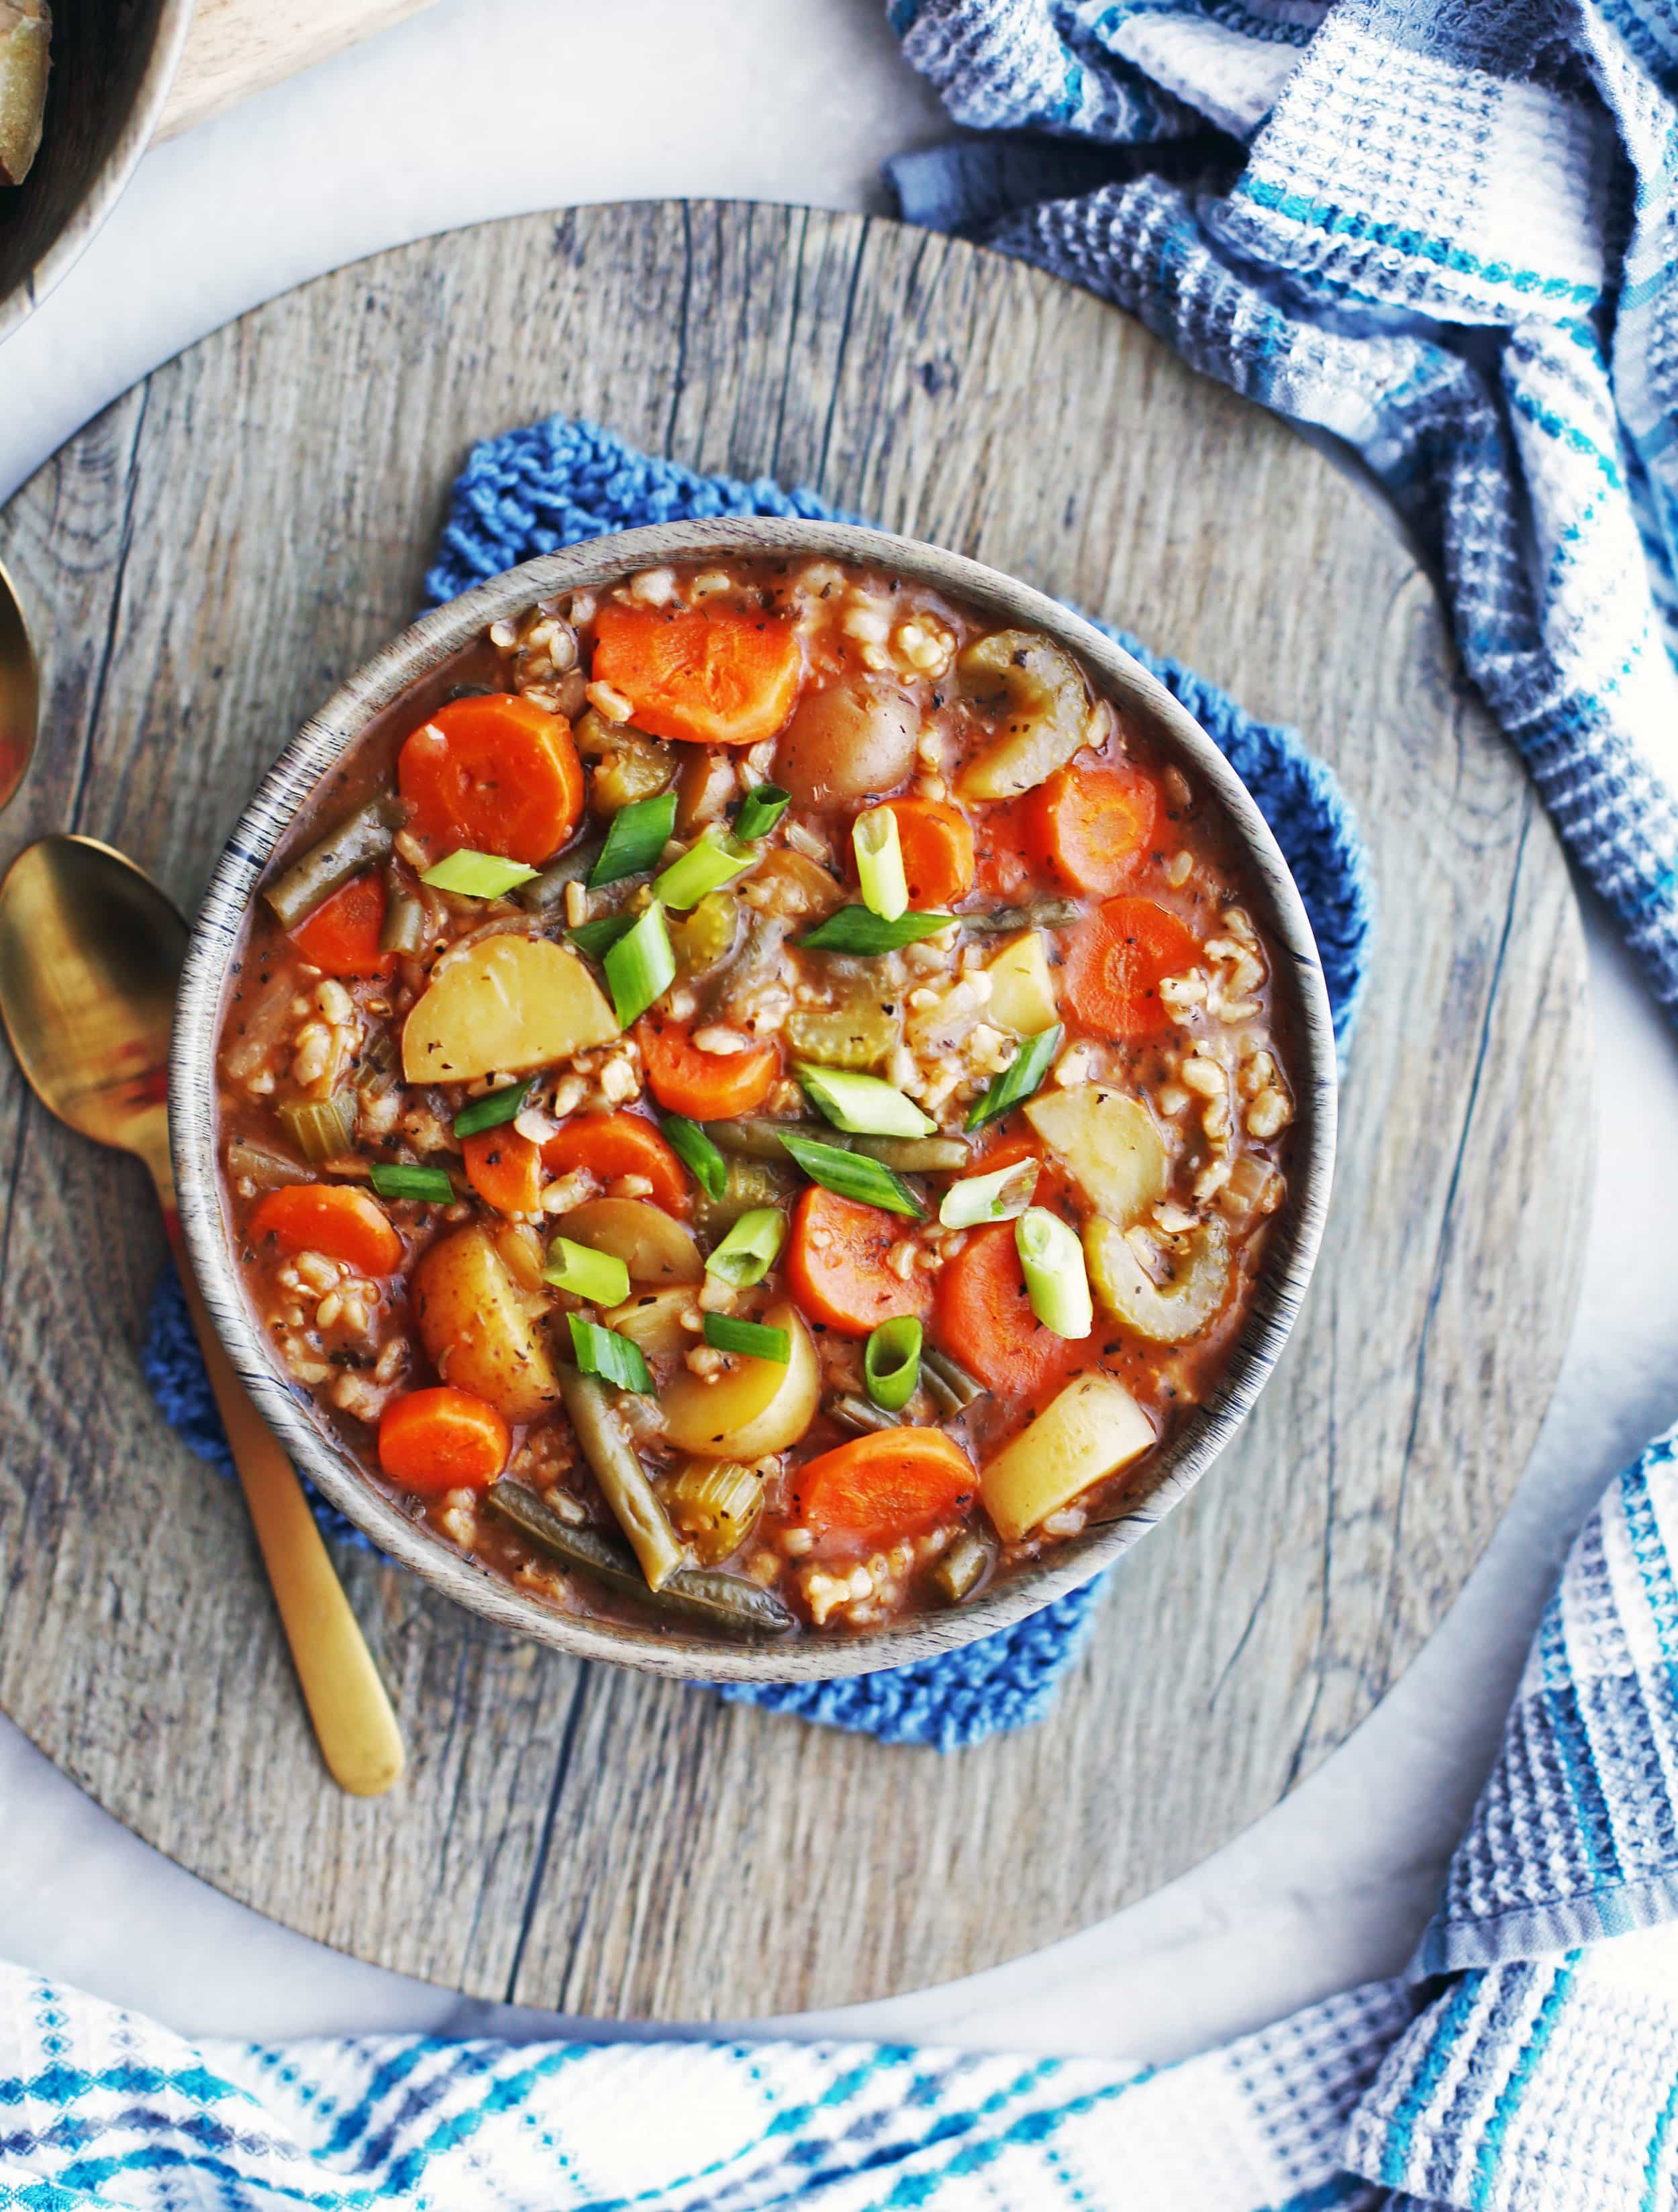 Instant Pot Hearty Vegetable and Brown Rice Soup - Yay! For Food